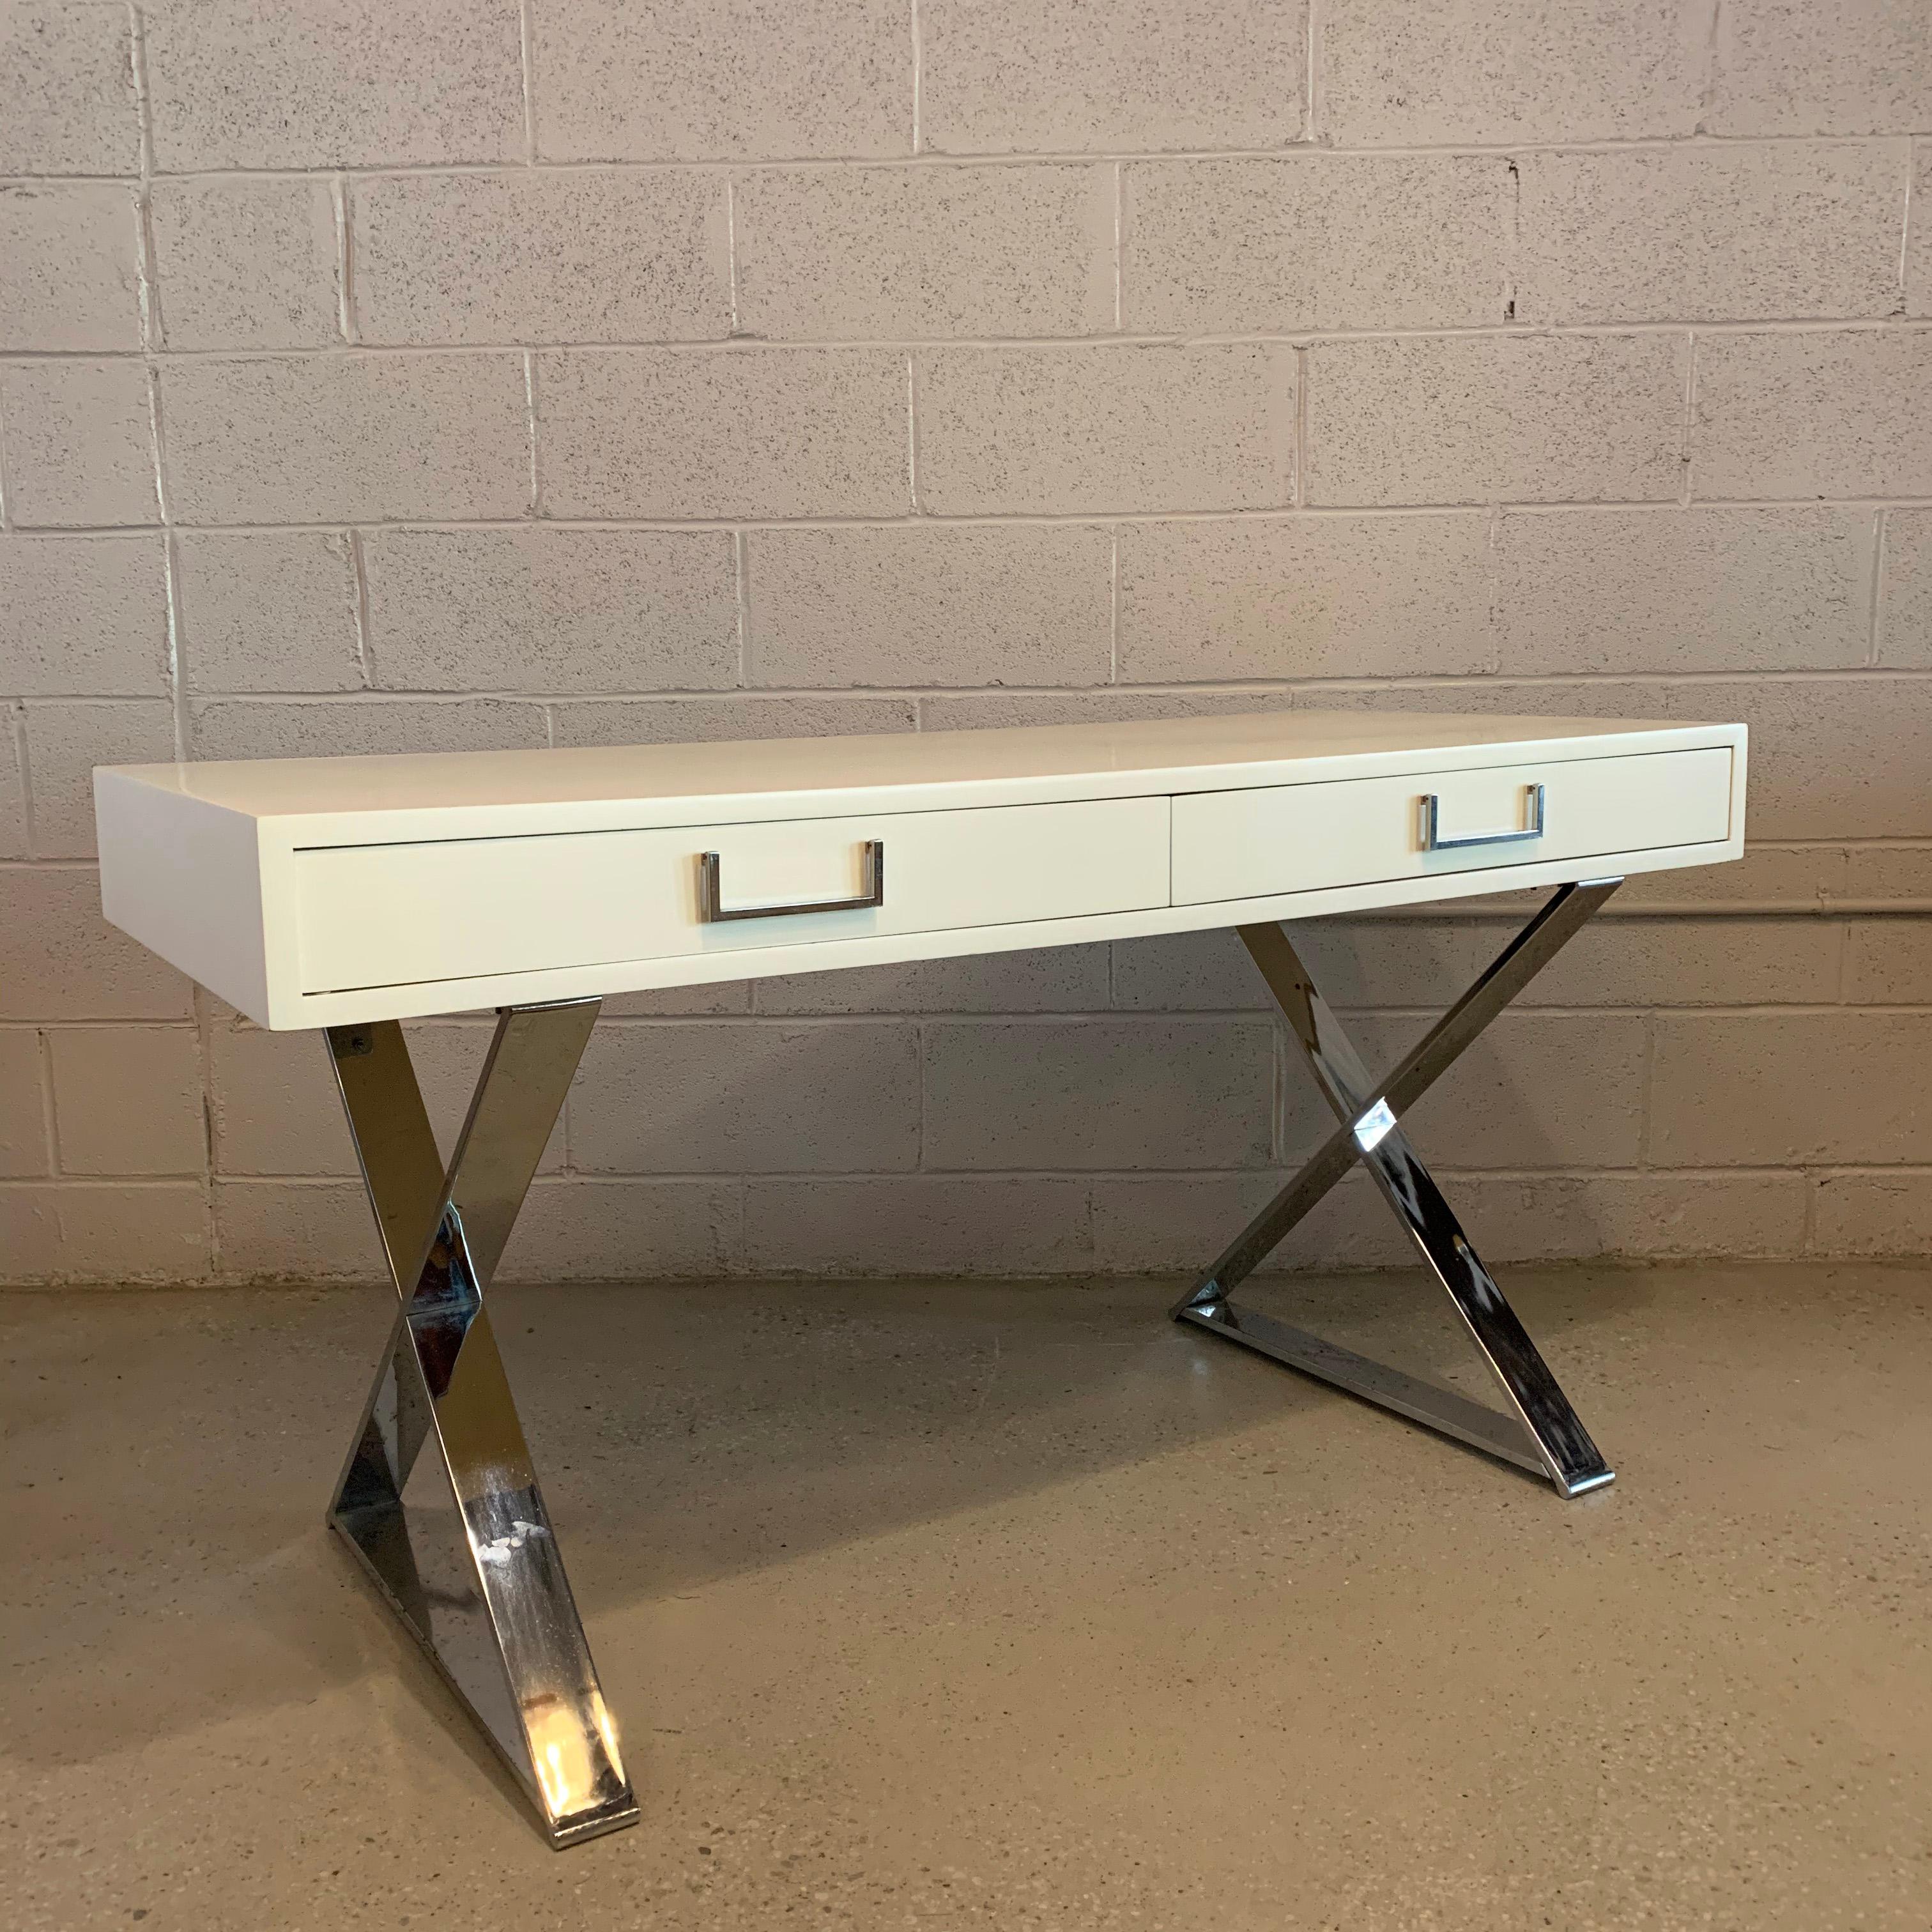 Mid-Century Modern, Campaign desk by West Michigan Furniture Company features a white lacquered top with 2 drawers with chrome hardware on chrome X bases. Height to bottom of desk is 23.75 inches.